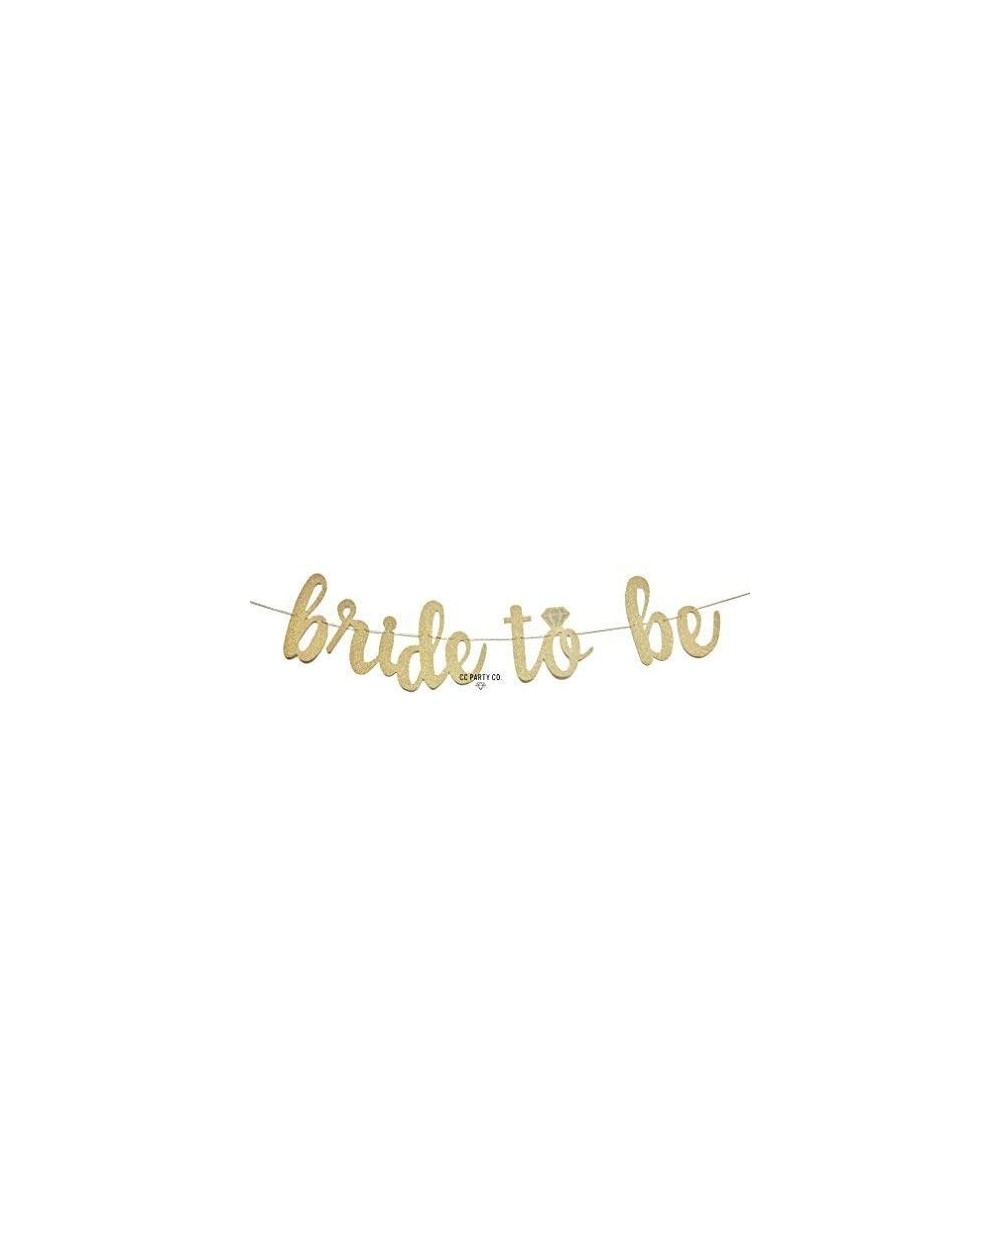 Banners & Garlands Bride to Be Gold Glitter Banner with Diamond Ring Detail - bachelorette party - bridal shower - engagement...